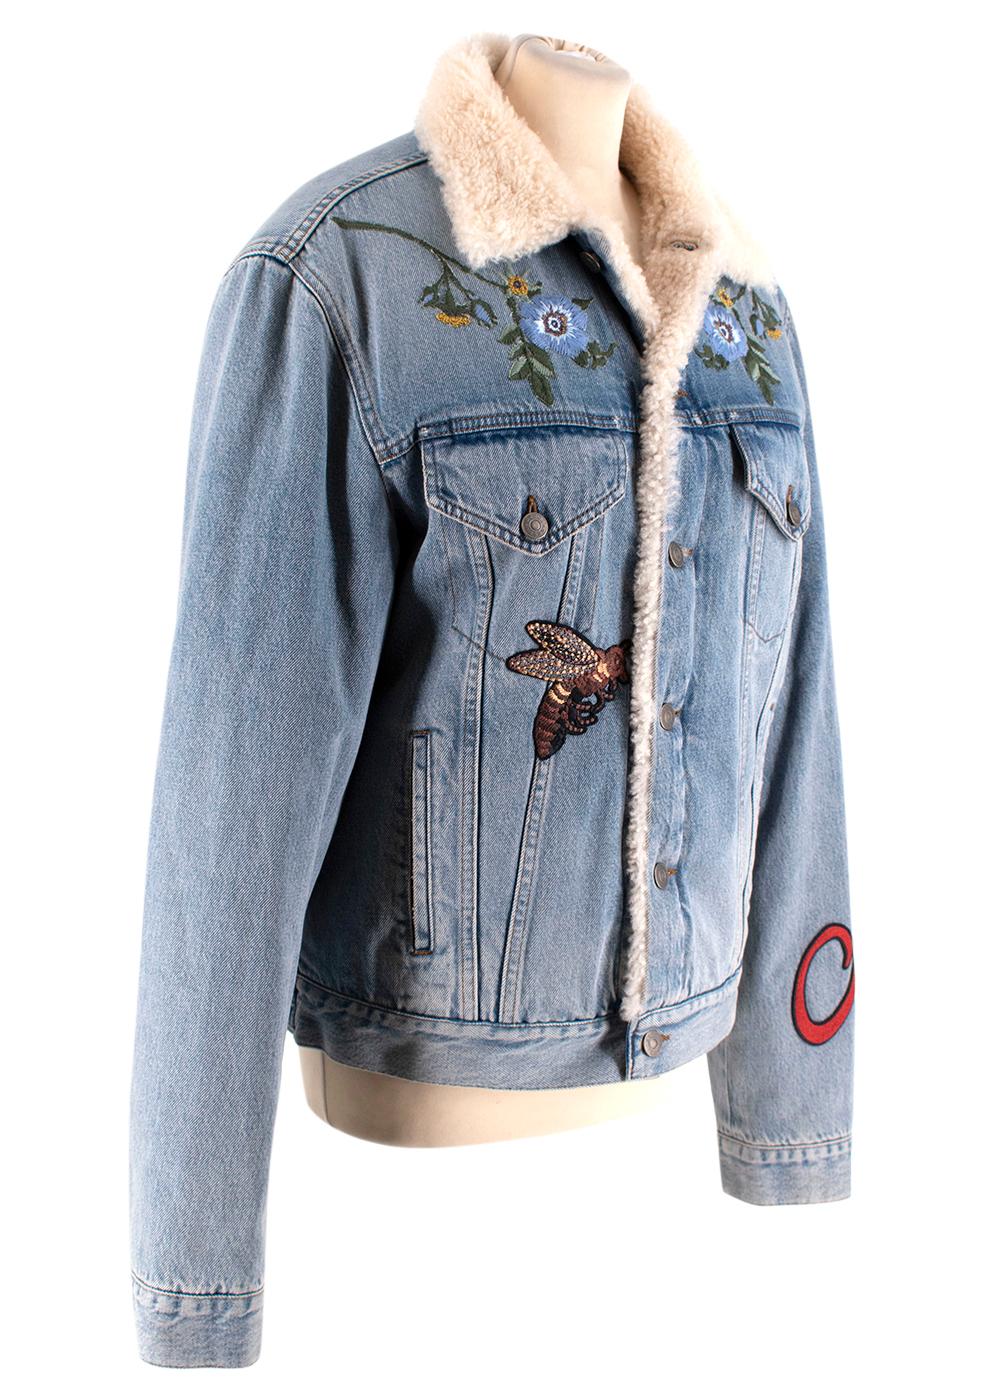 Gucci Shearling-Lined Embroidered Denim Jacket

- Light blue bleach denim jacket 
- Shearling lining 
- Embroidered flowers, butterflies, tiger and 'L'Aveugle Par Amour' appliques 
- Front buttoned patch and side slit pockets 
- Gucci embossed